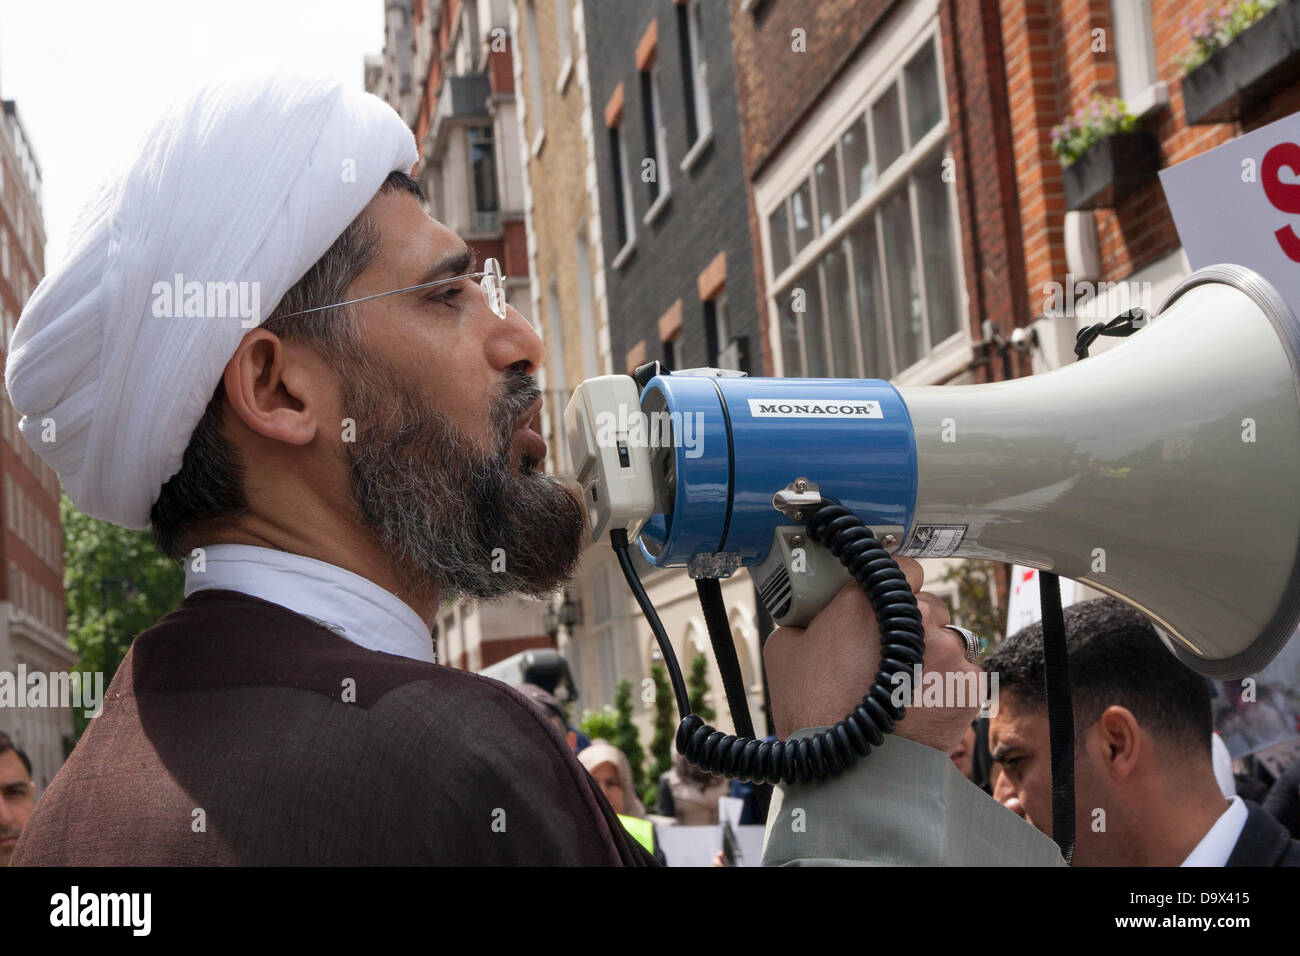 London, UK. 27th June 2013. An Iman makes a speech to the assembled crowd outside the Egyptian embassy  as Egyptians in London protest against sectarian killings in Egypt. Credit:  Paul Davey/Alamy Live News Stock Photo